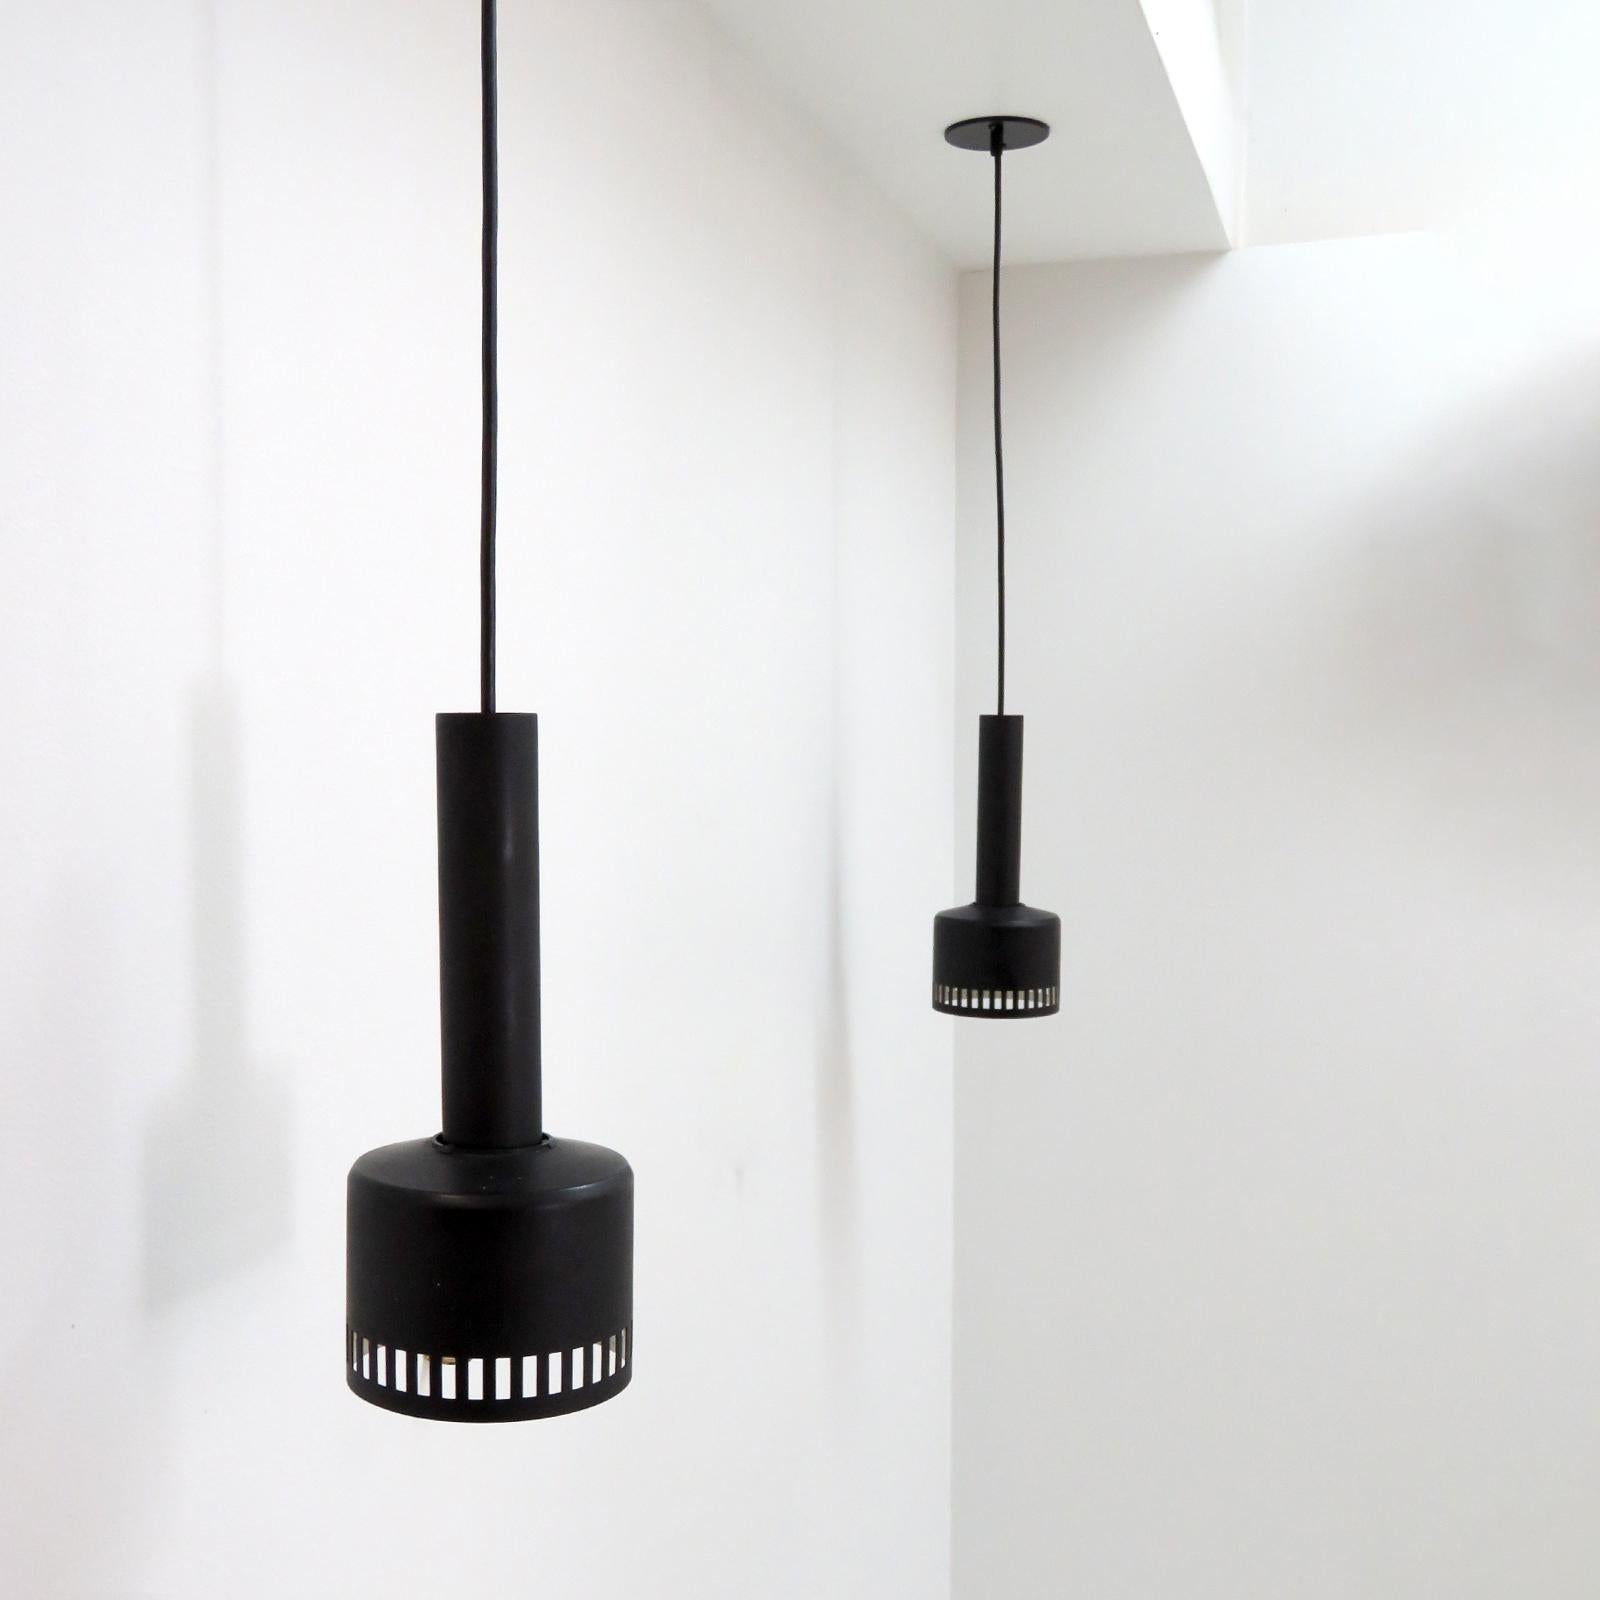 Minimalist Lita 2300 CF, France, pendant lights in matte black, with detachable perforated shade, total height can be adjusted per request, wired for US standards, one E26 socket per fixture, max. Wattage 75w each, bulbs provided as a onetime